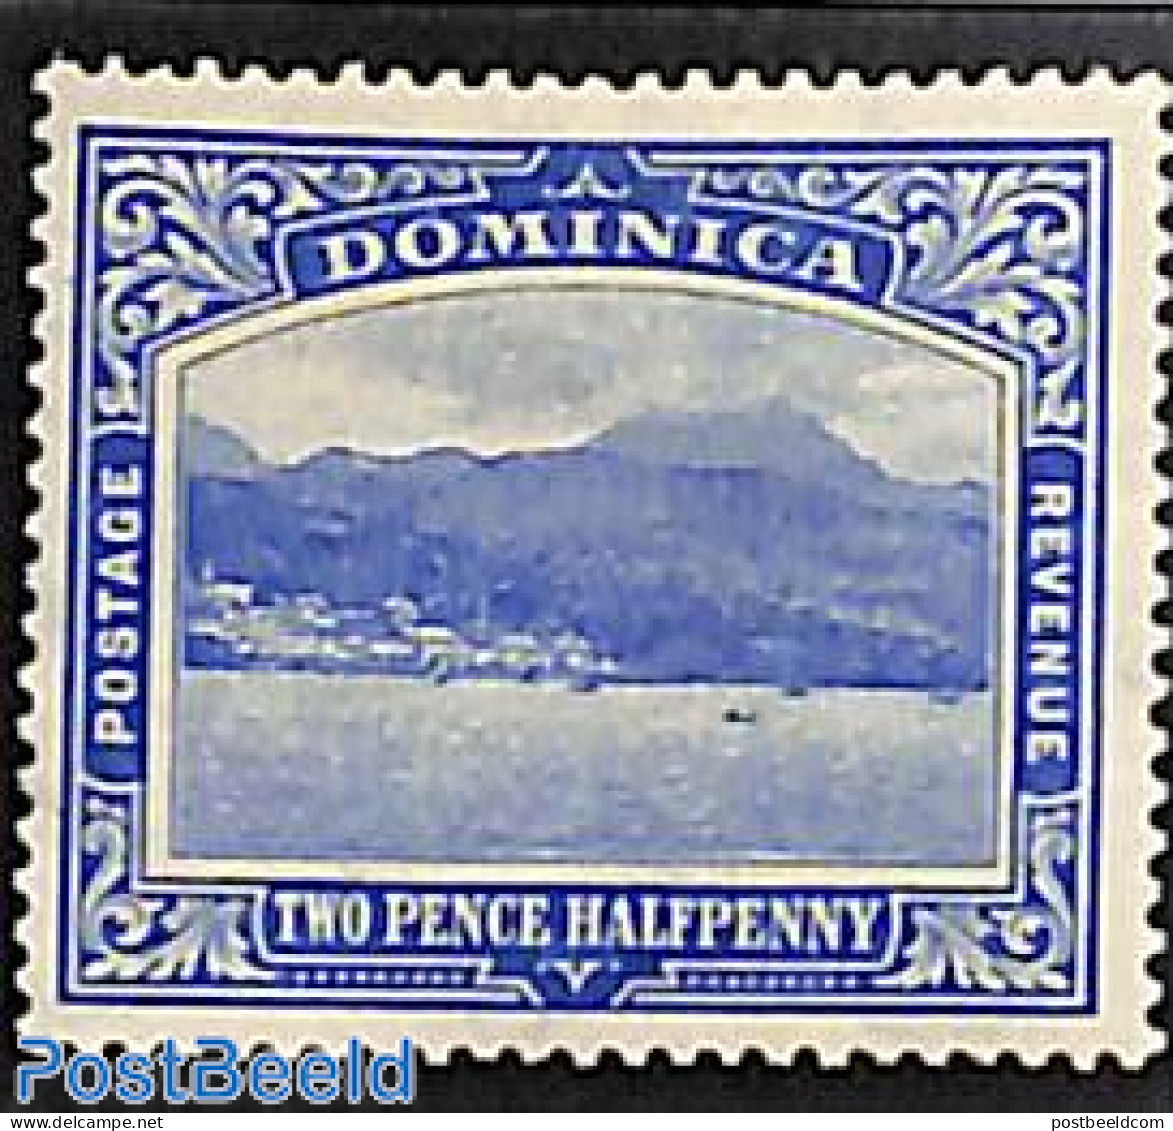 Dominica 1908 2.5d, WM Mult Crown CA, Stamp Out Of Set, Unused (hinged) - Dominican Republic